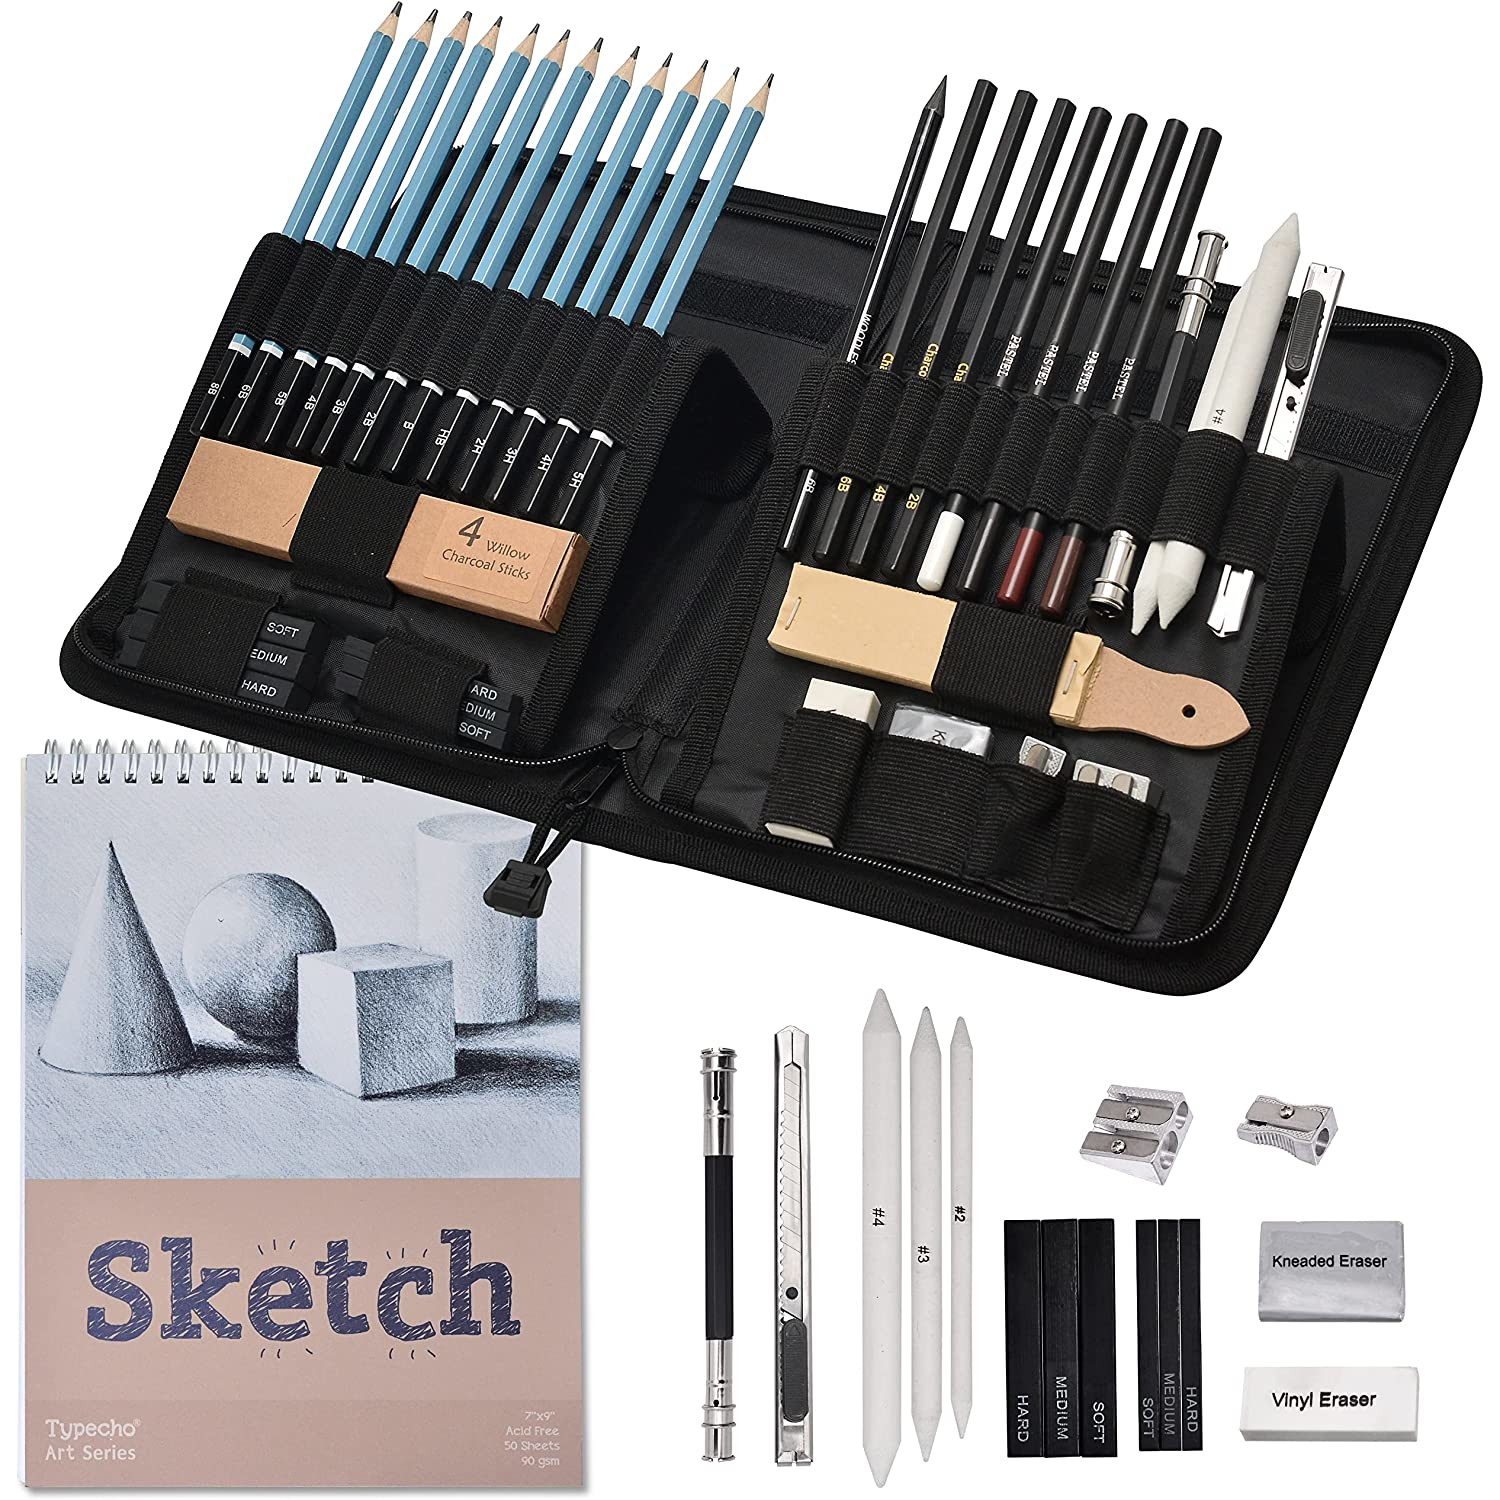 Drawing and Sketching Pencil Art Set (20 Items) - Complete Kit with Graphite  Pencils, Charcoal Pencils, Sticks, Blending Stumps, Erasers, and  Sharpeners.